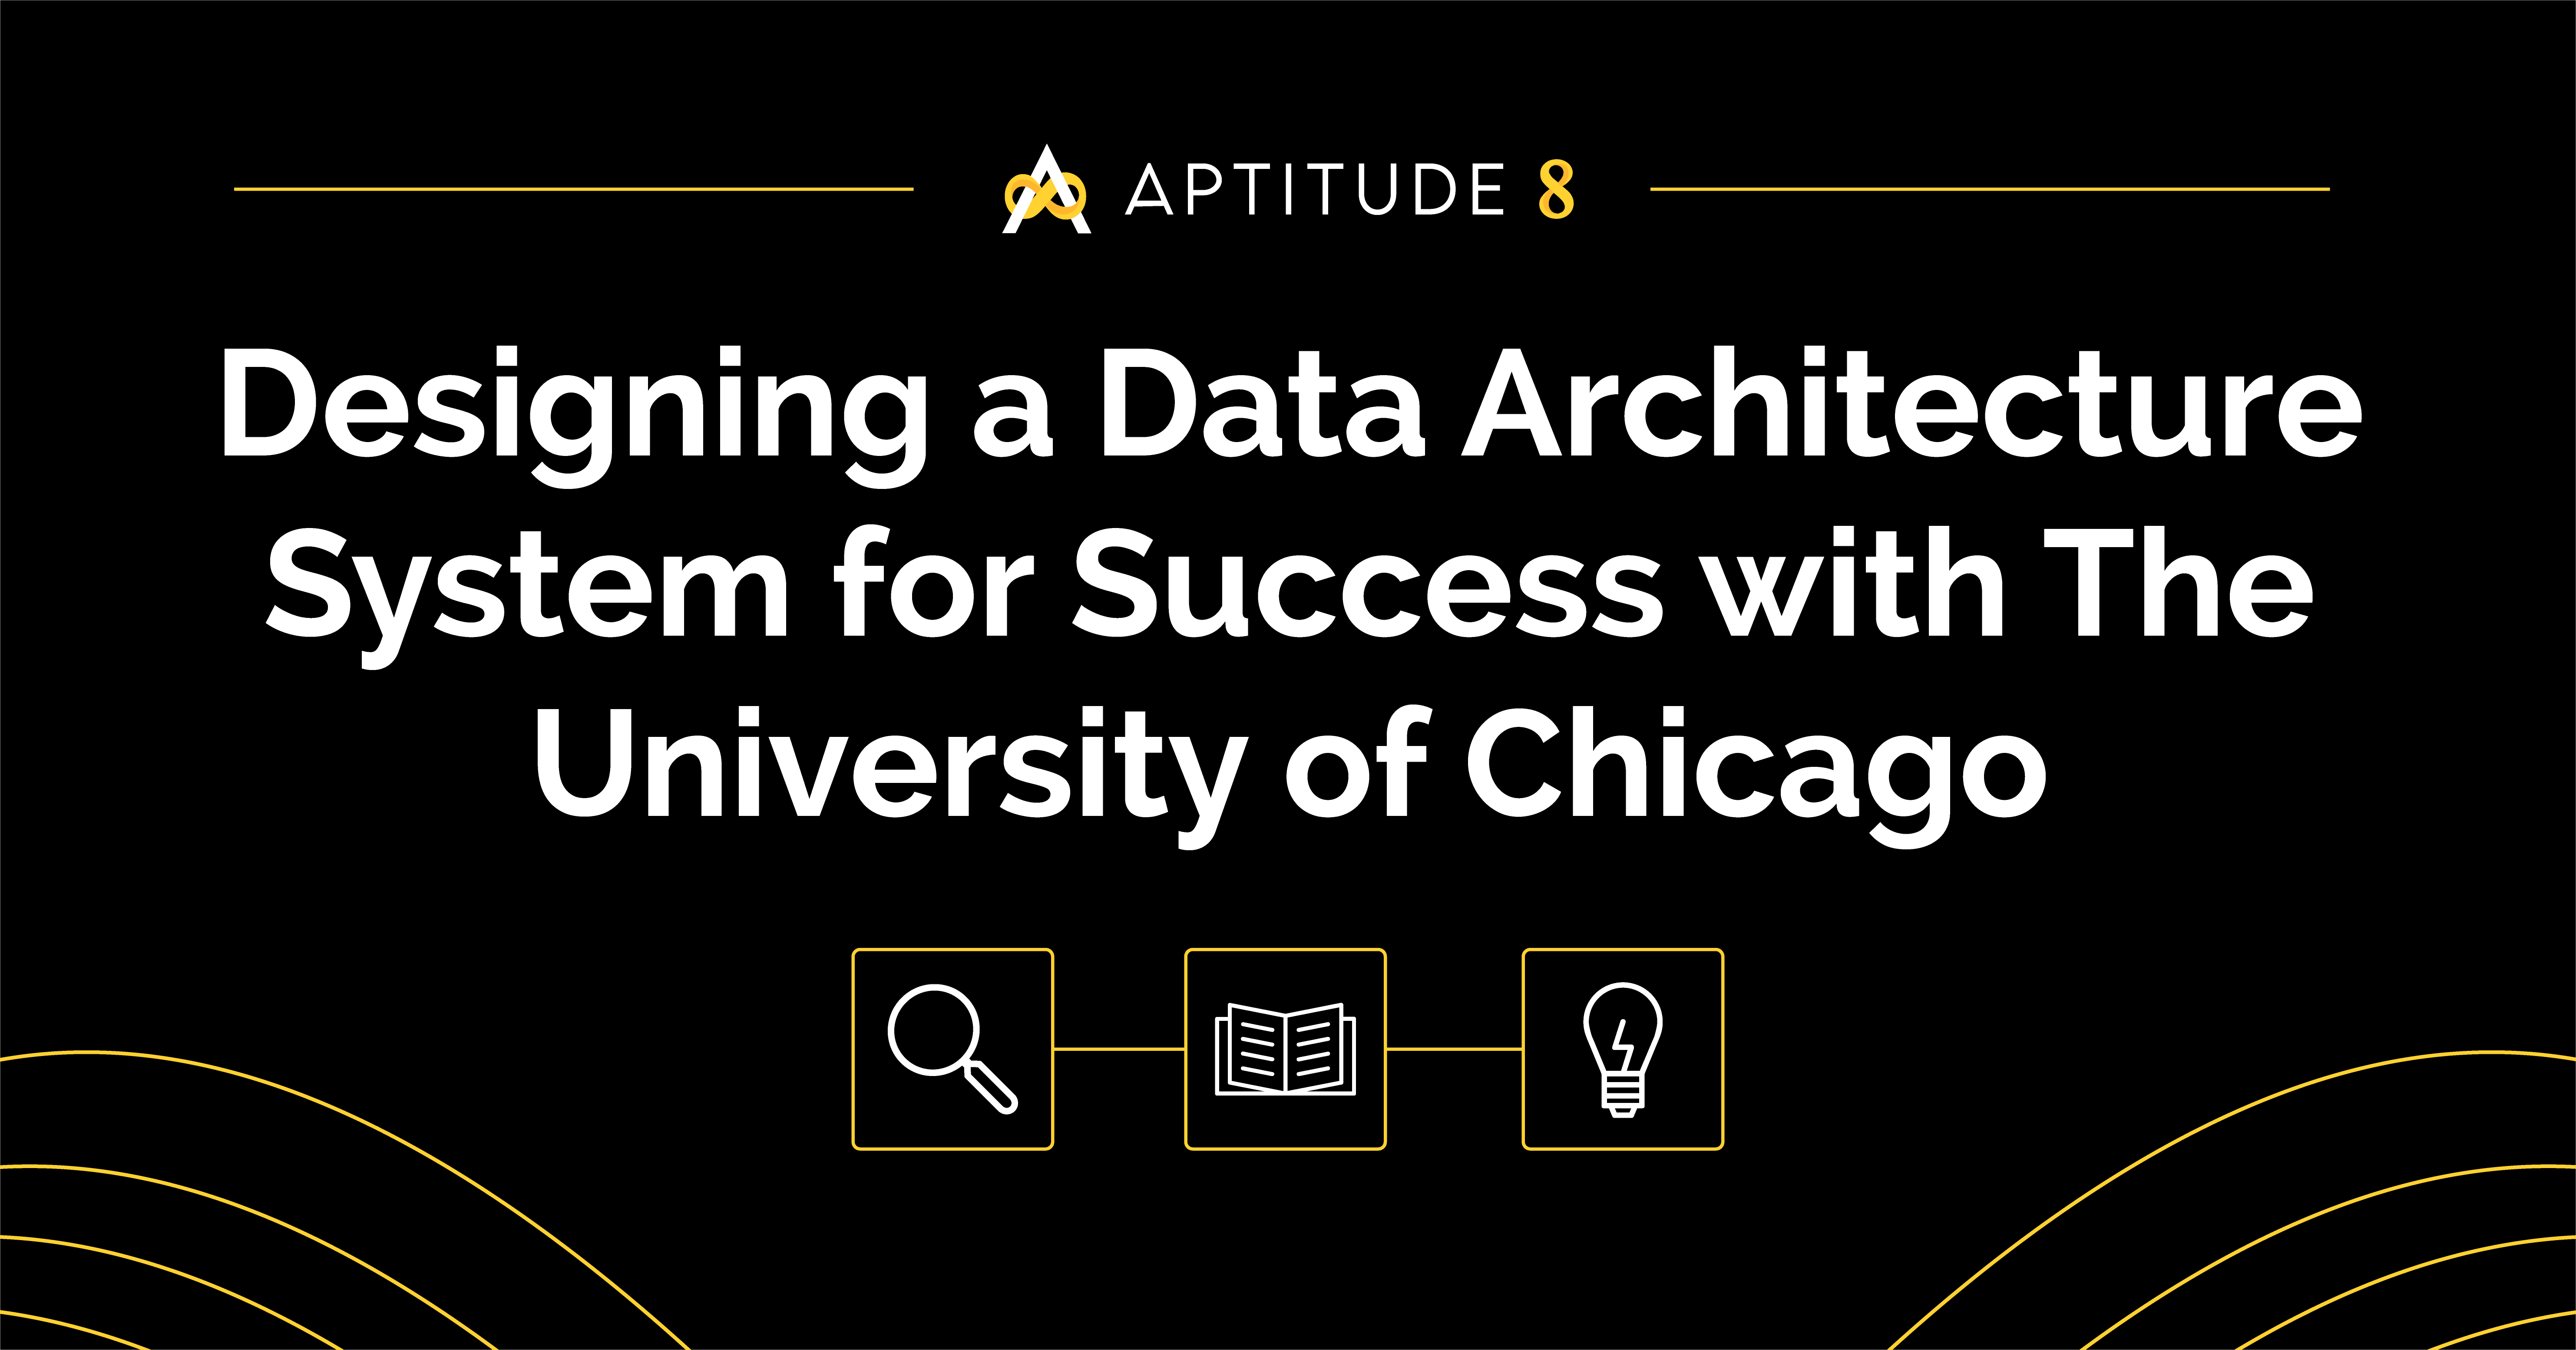 Designing a Data Architecture System for Success with The University of Chicago